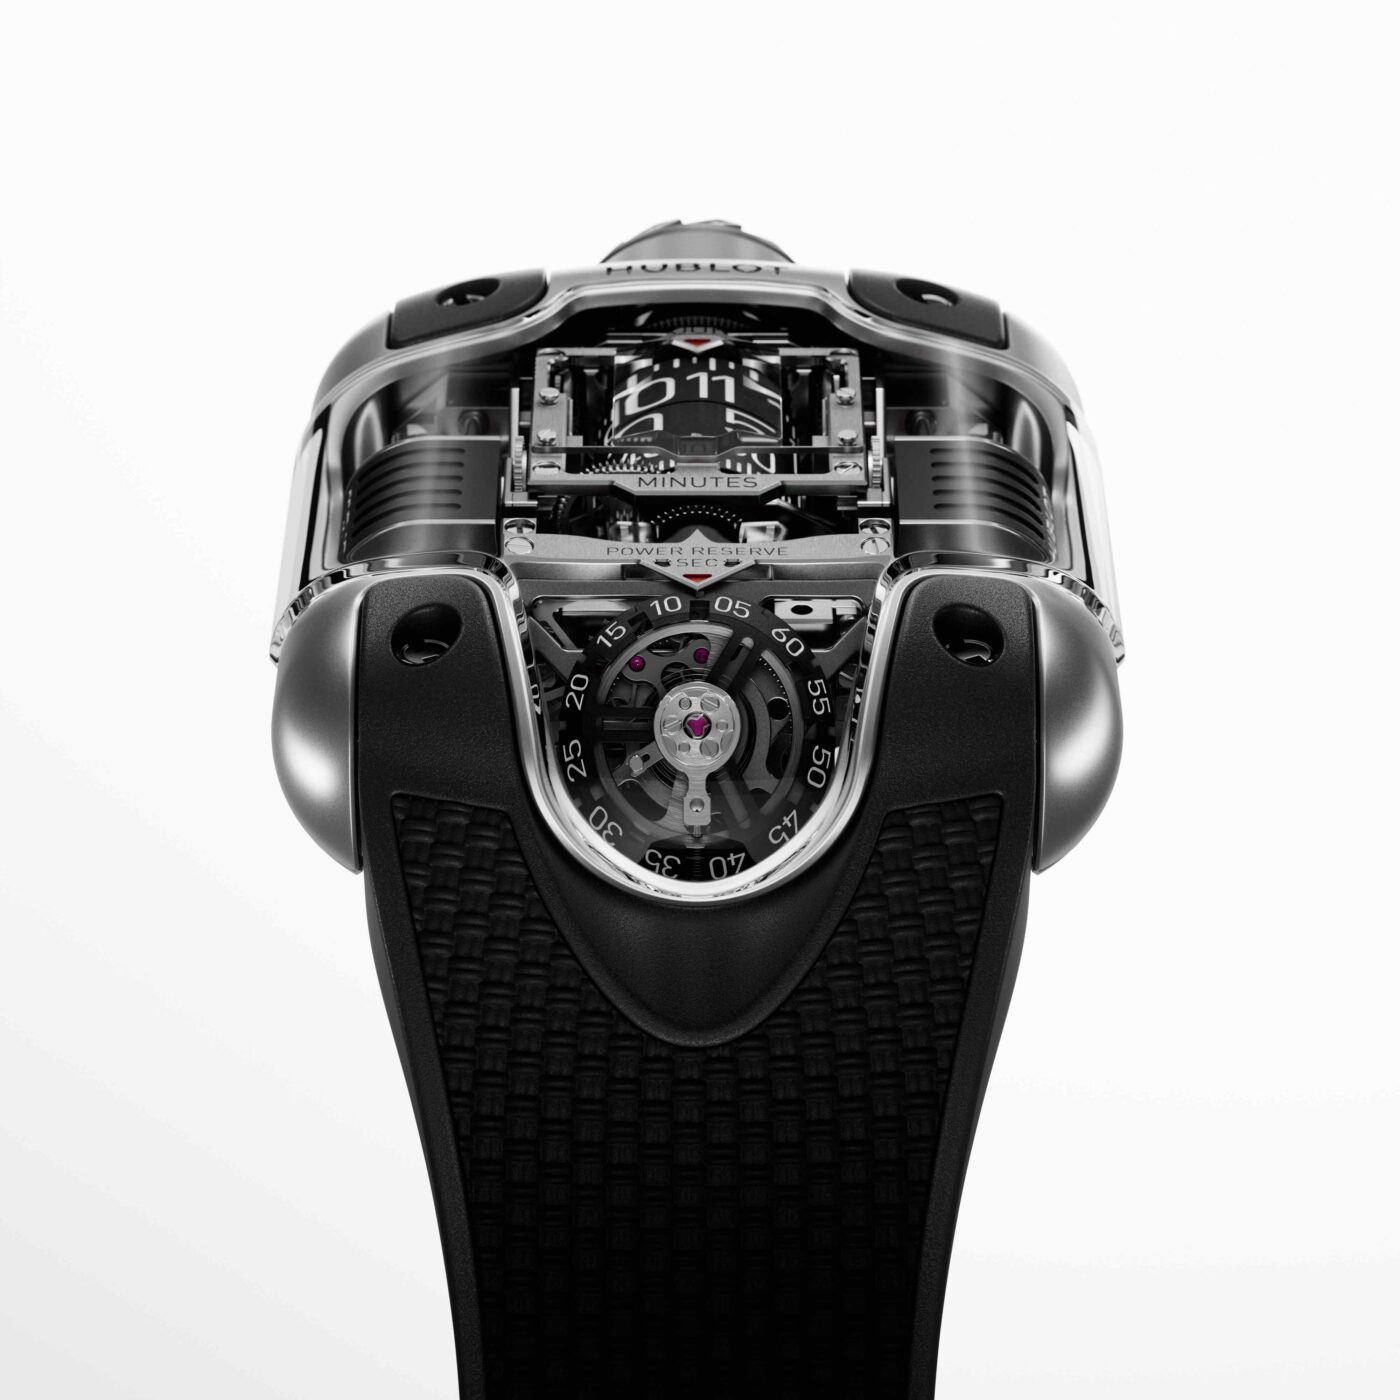 Hublot's Latest Tourbillon Is More Complicated Than All Your ...